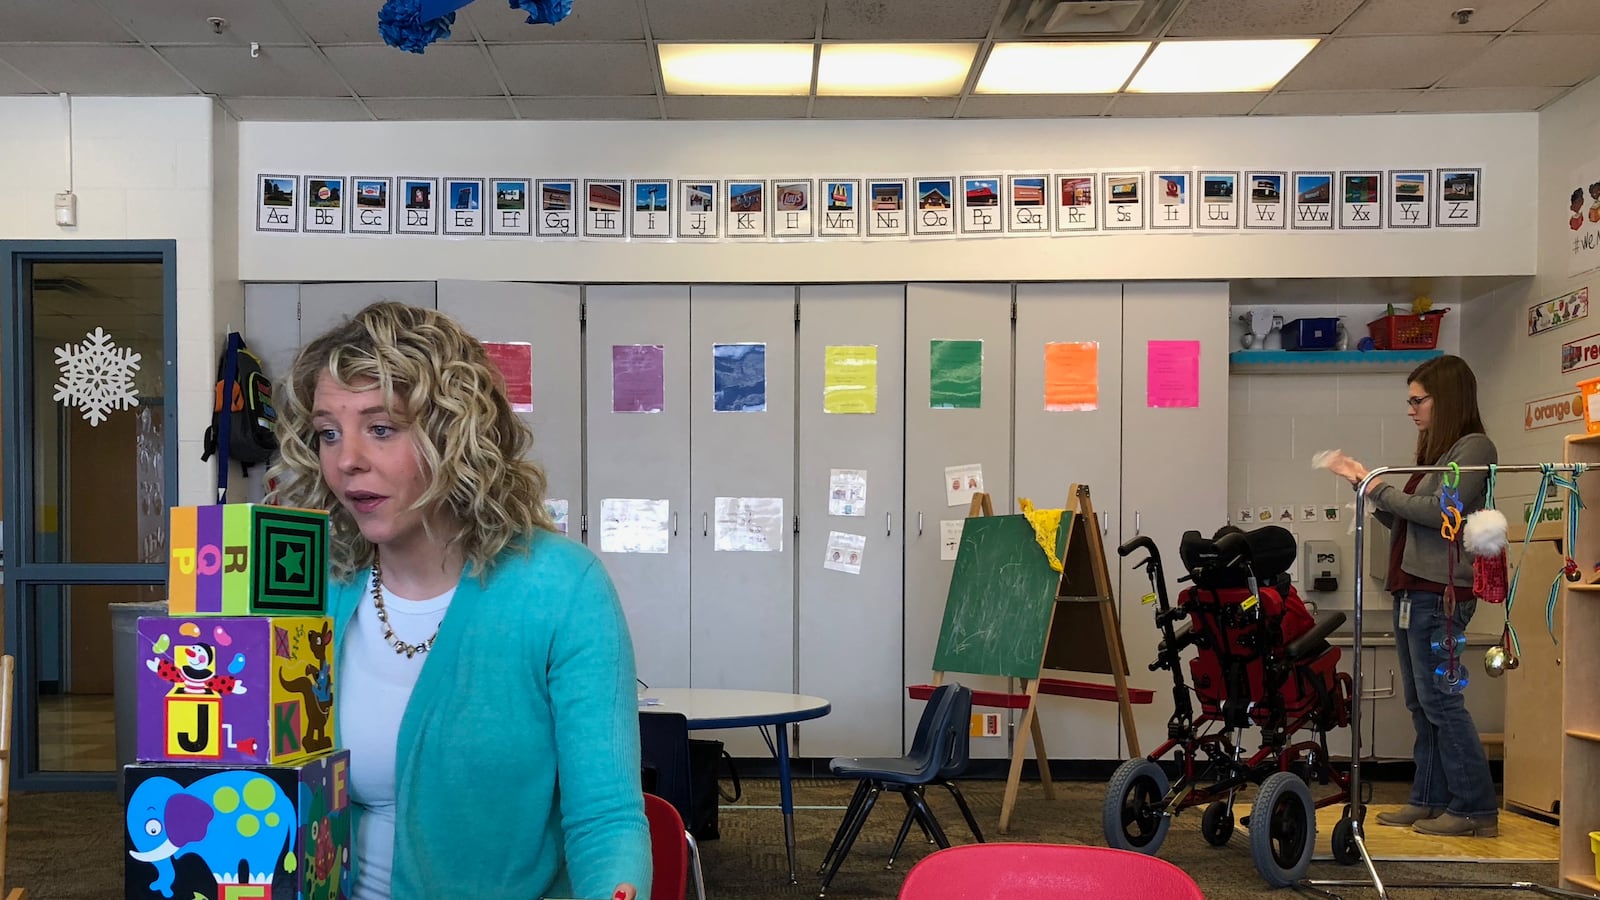 Cate King, a preschool teacher in a developmental classroom at School 48 for children with disabilities, has been with Indianapolis Public Schools for three years.